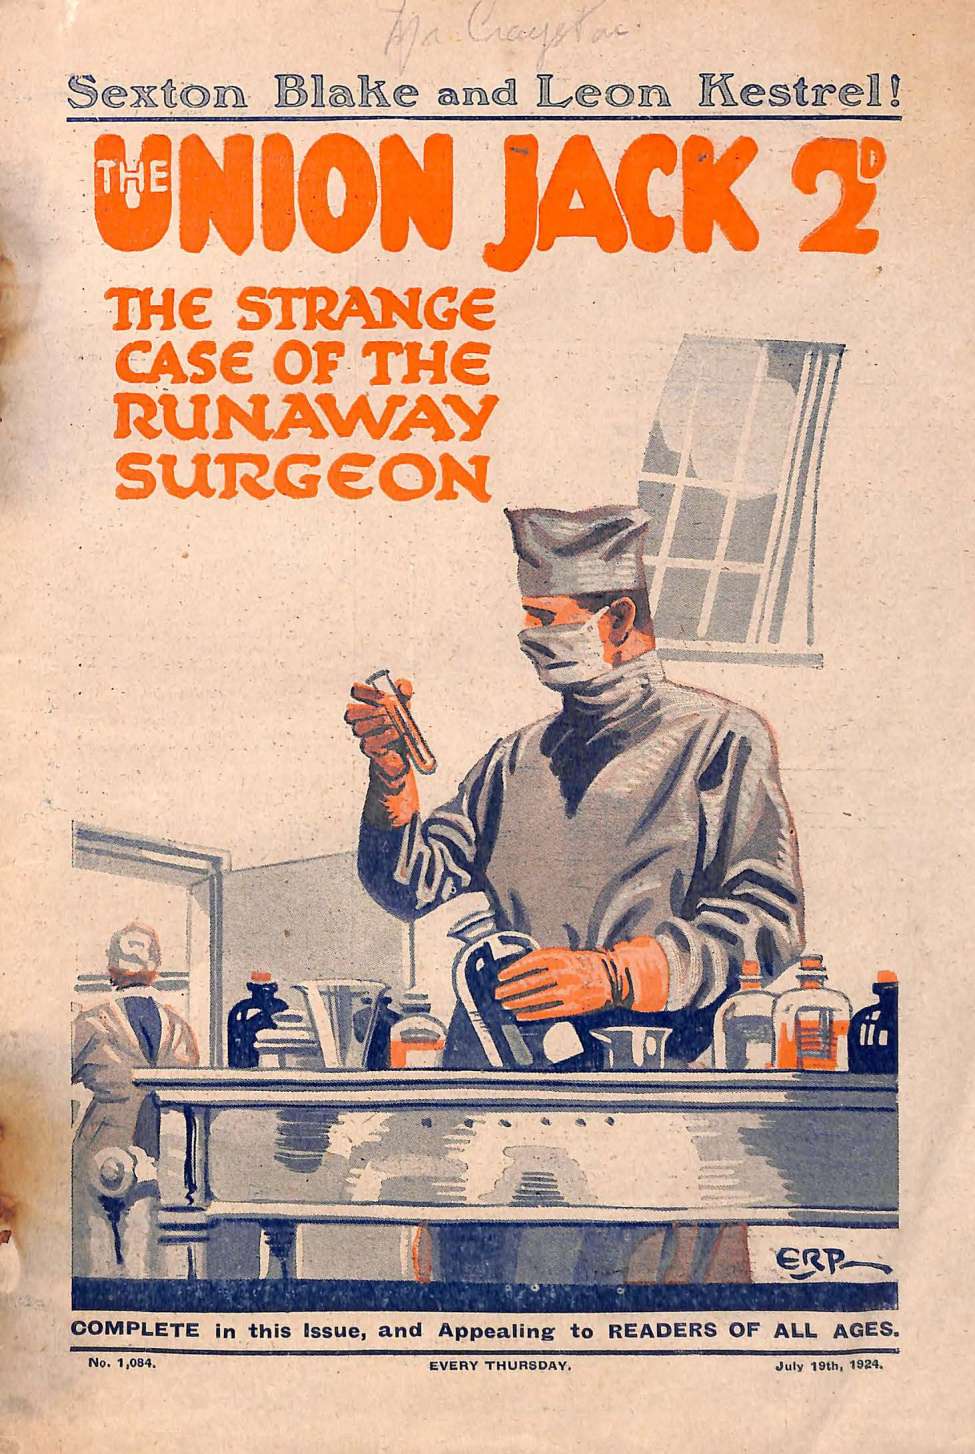 Comic Book Cover For Union Jack 1084 - The Strange Case of the Runaway Surgeon